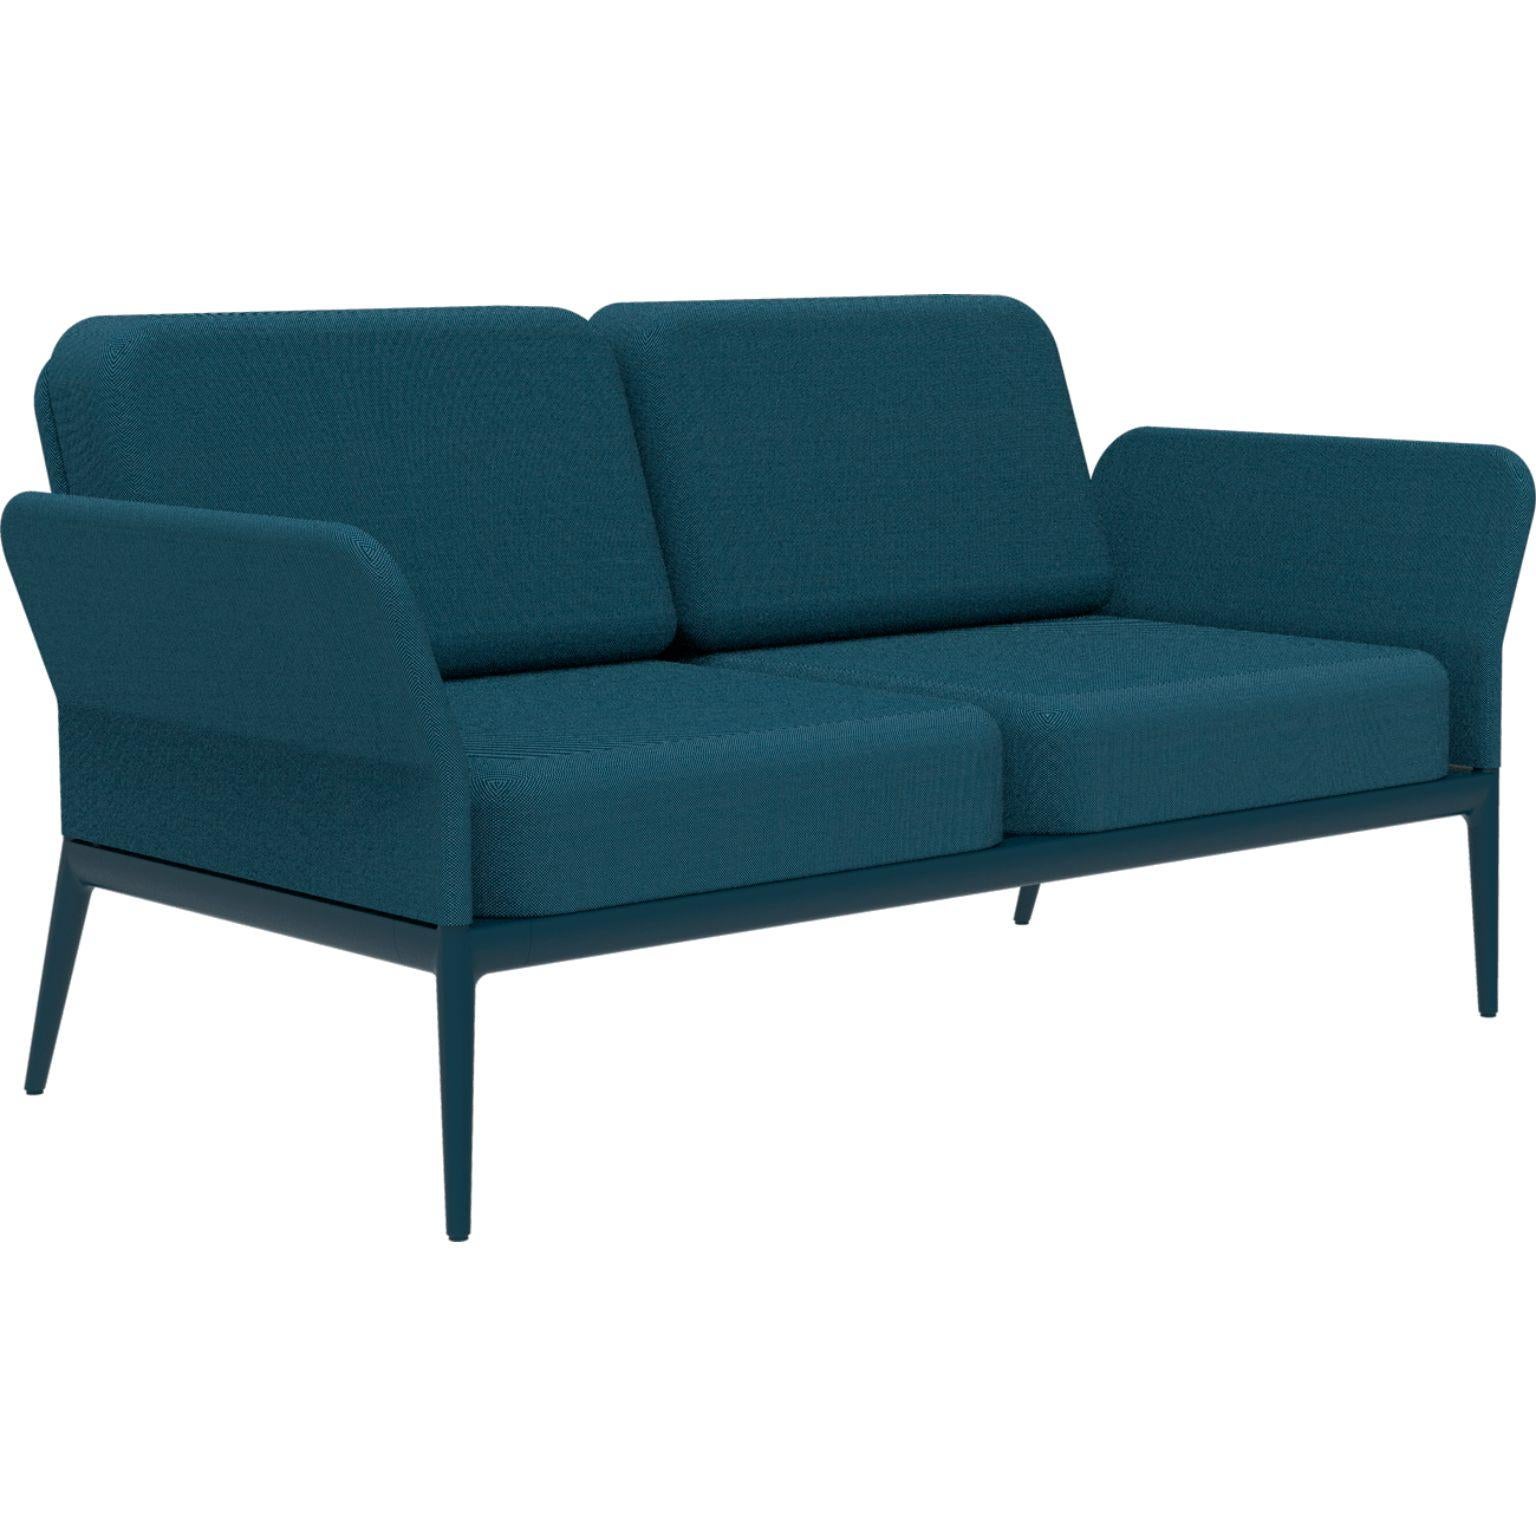 Cover navy sofa by MOWEE
Dimensions: D 83 x W 160 x H 81 cm (seat height 42 cm).
Material: Aluminum and upholstery.
Weight: 32 kg.
Also available in different colors and finishes.

An unmistakable collection for its beauty and robustness. A